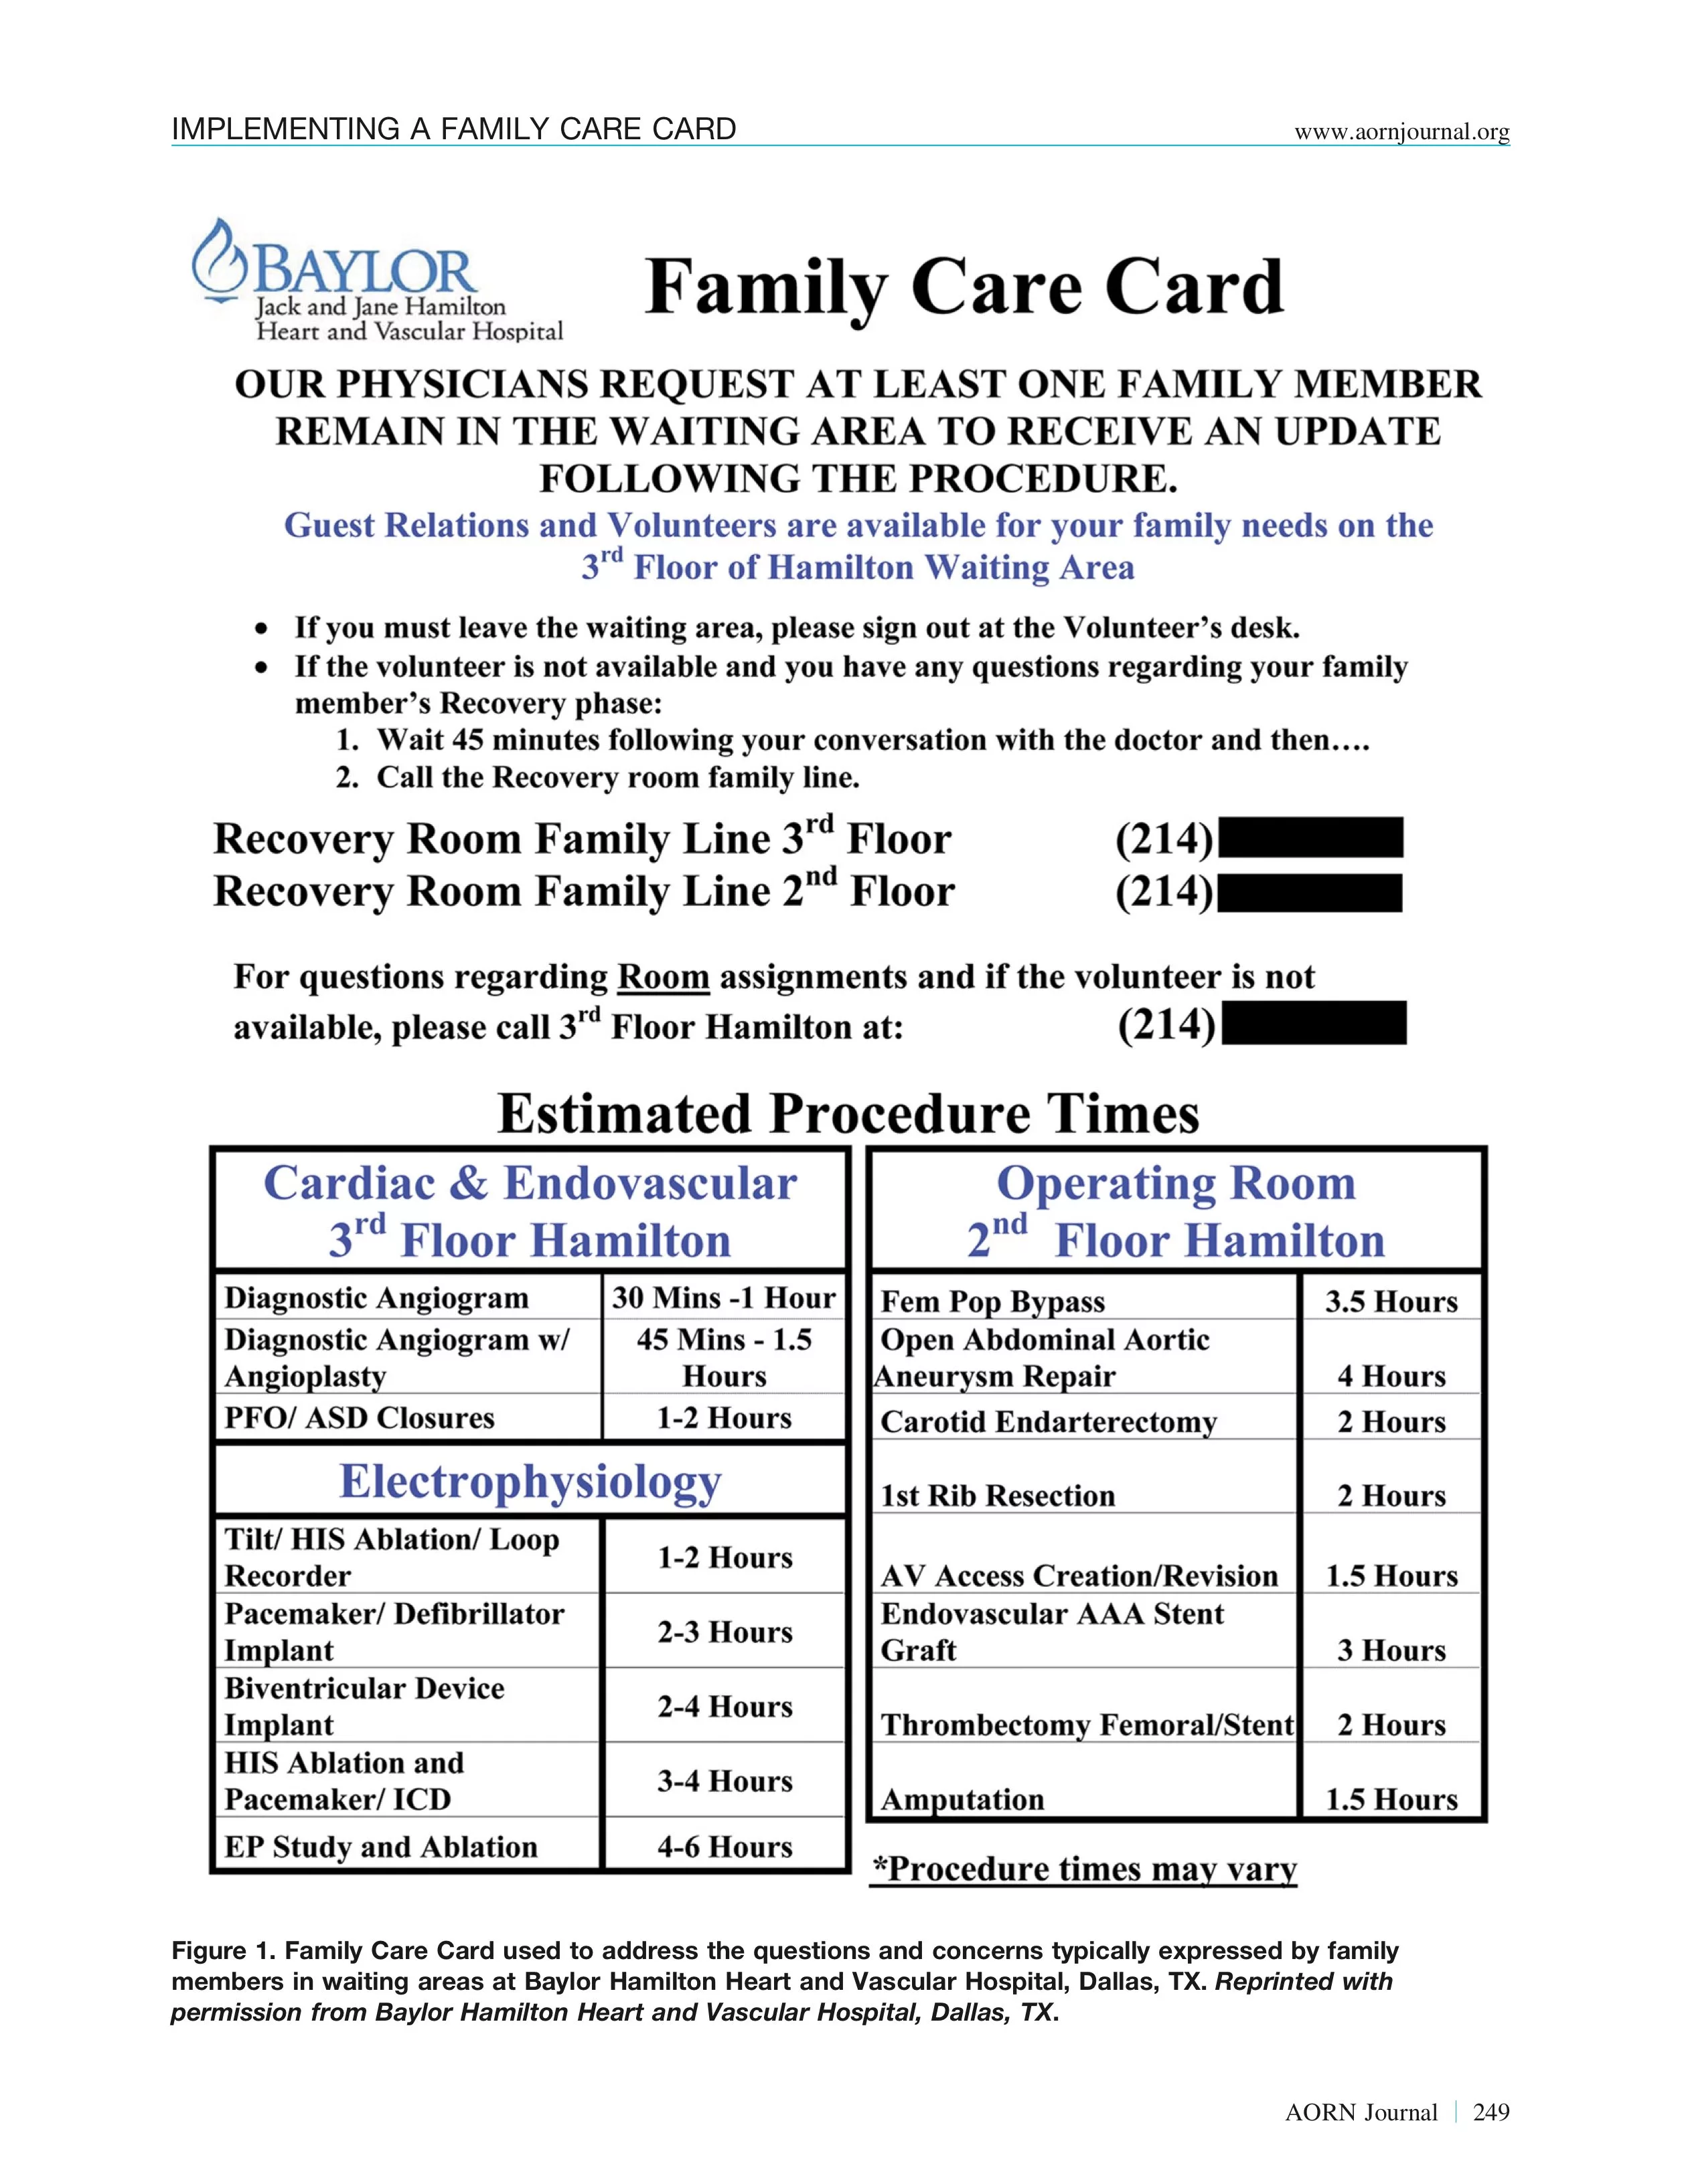 Family Care Card Sample Image